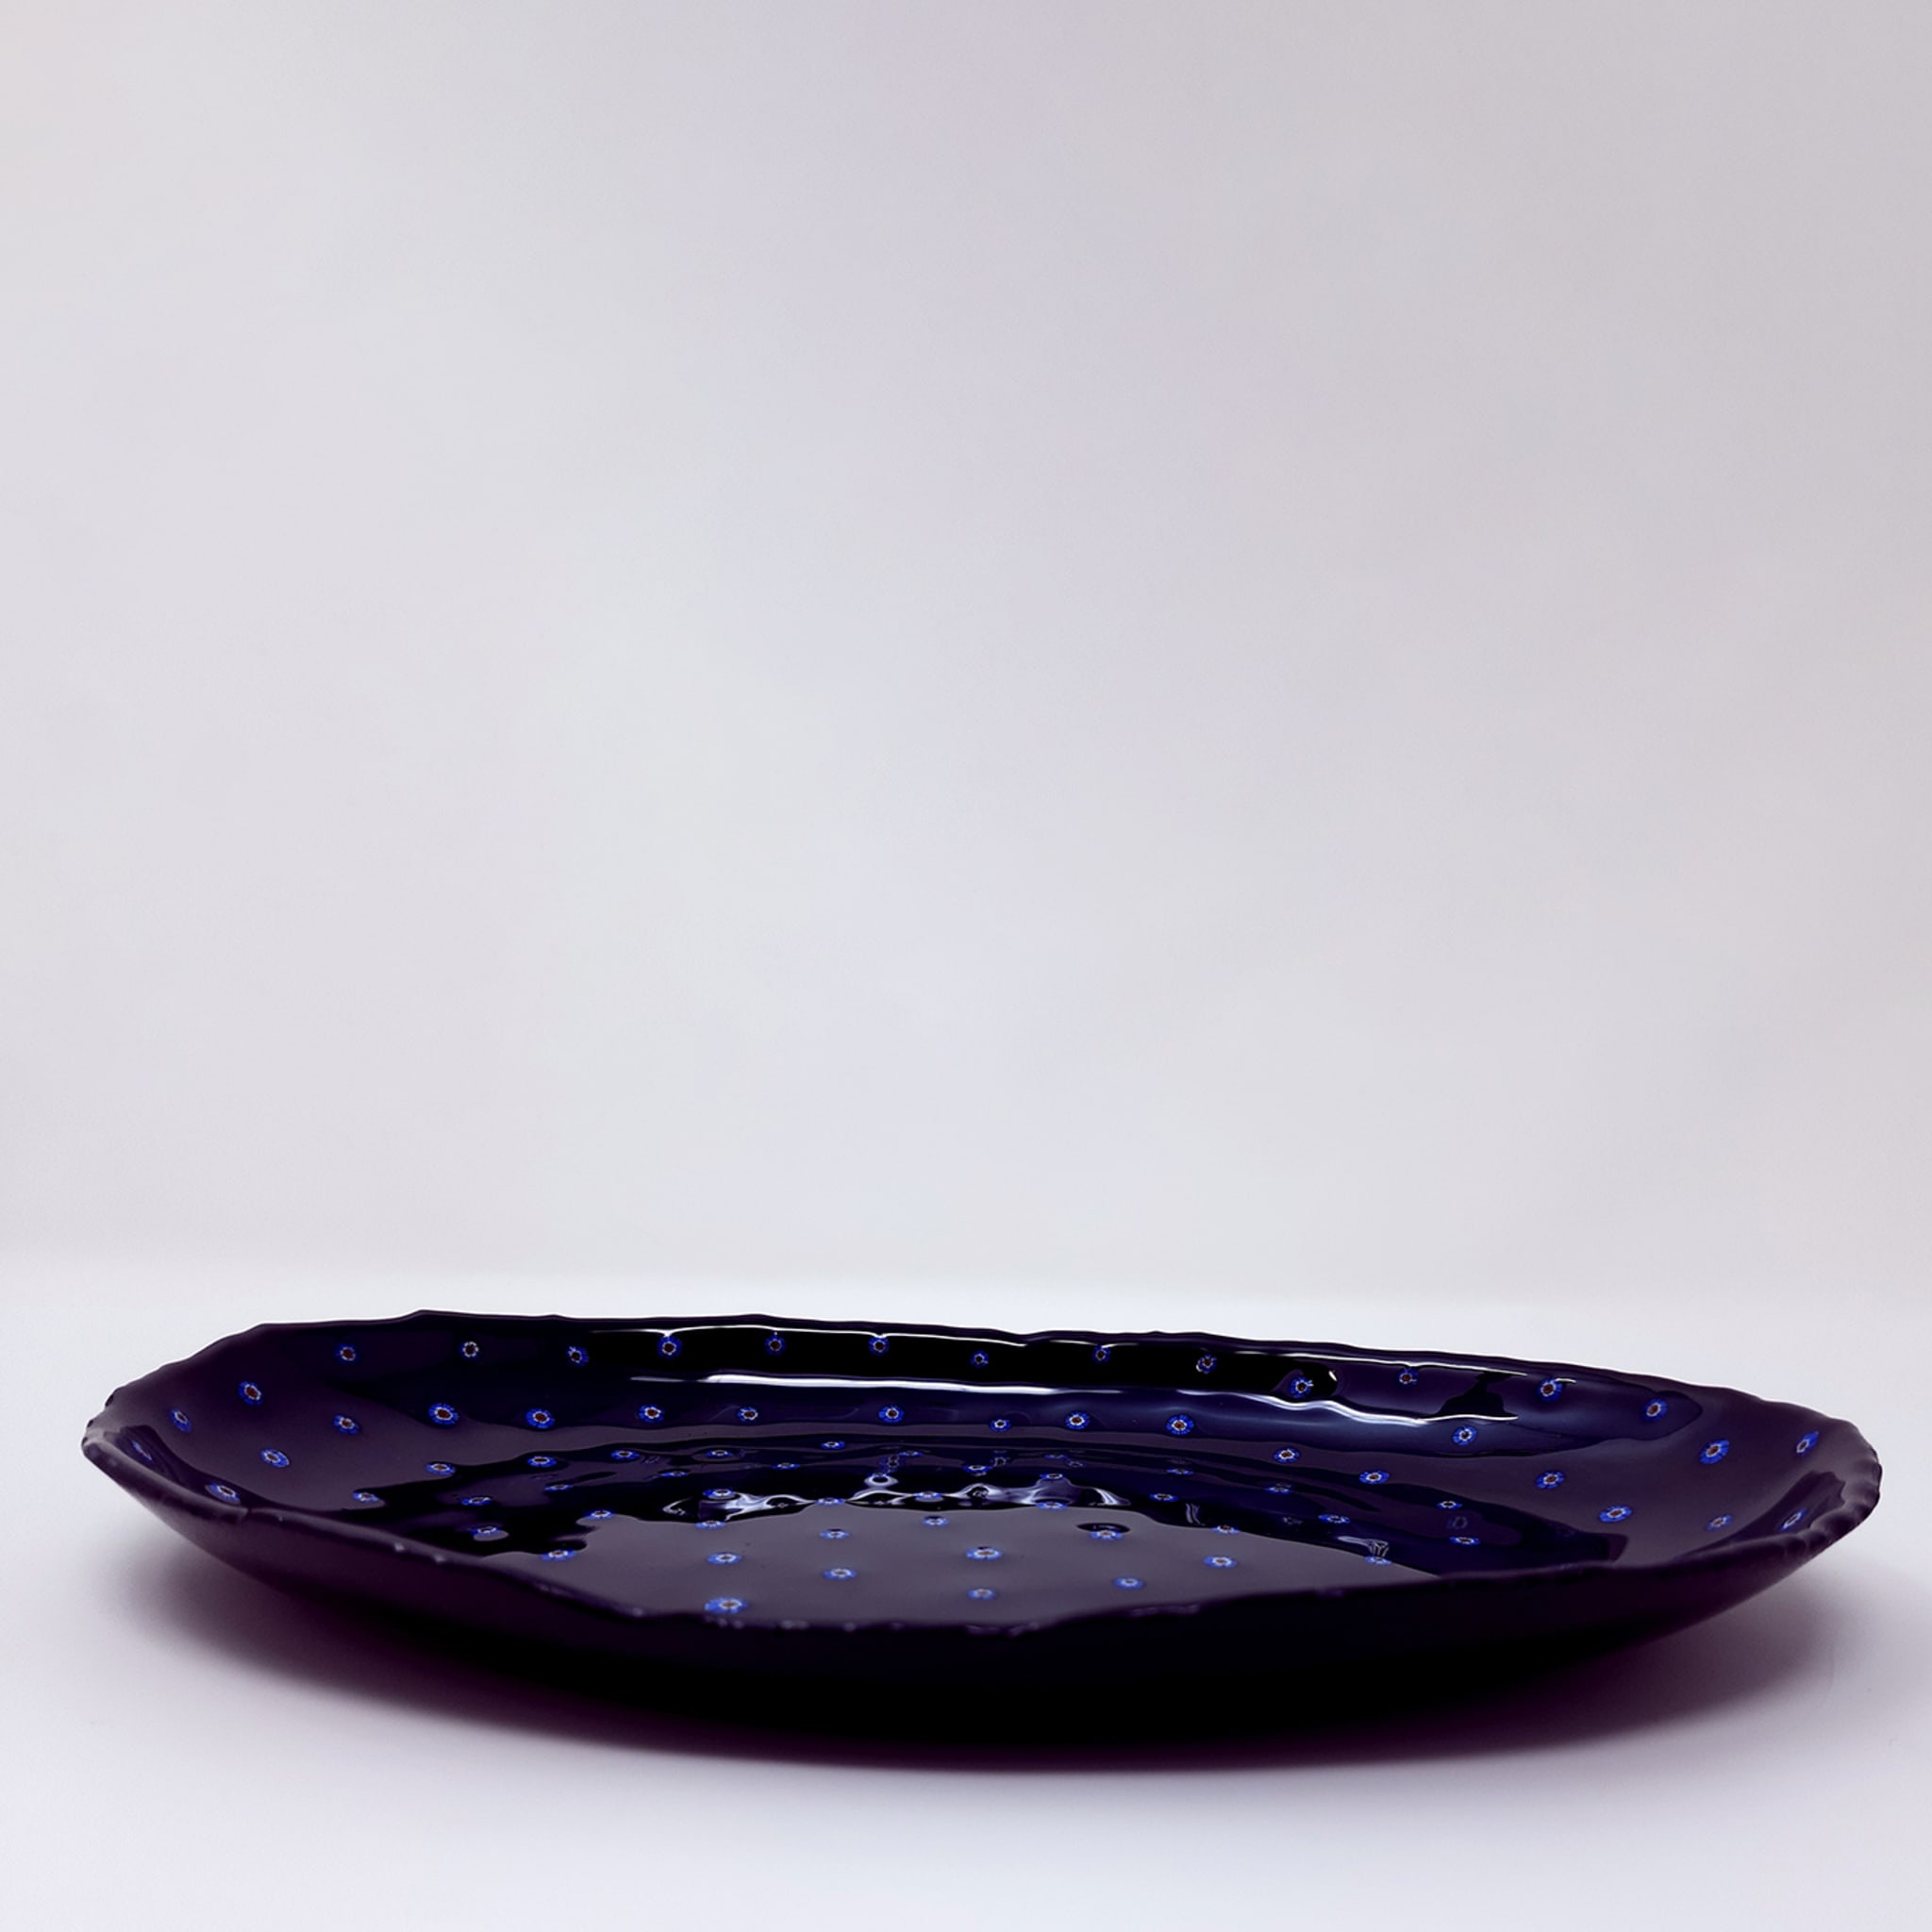 Black Glass Serving Platter with floral murrini inlays - Alternative view 2